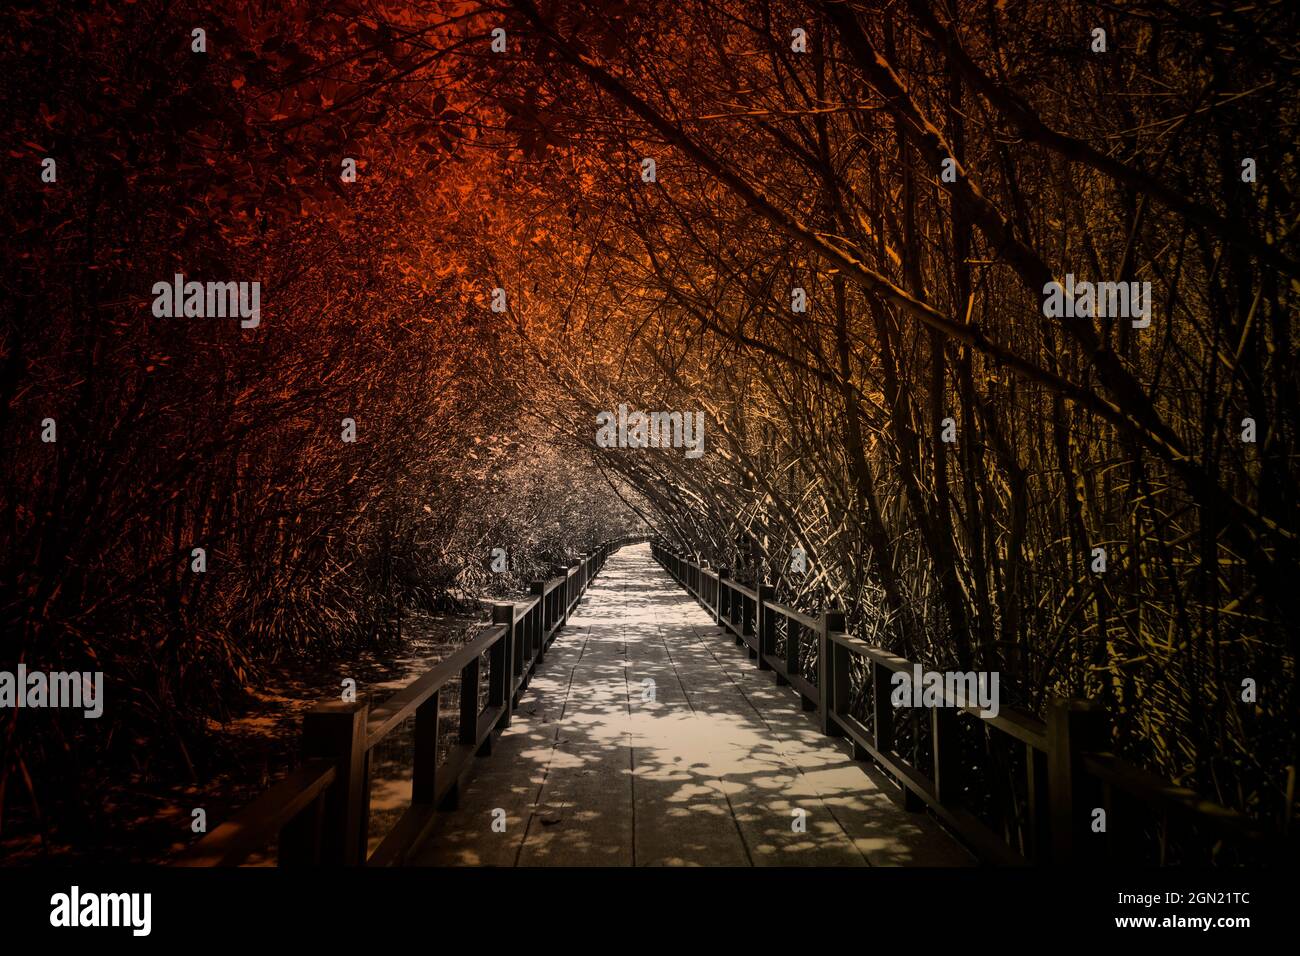 Wooden footpath bridges through tunnel of trees in dark and terrifying. Stock Photo